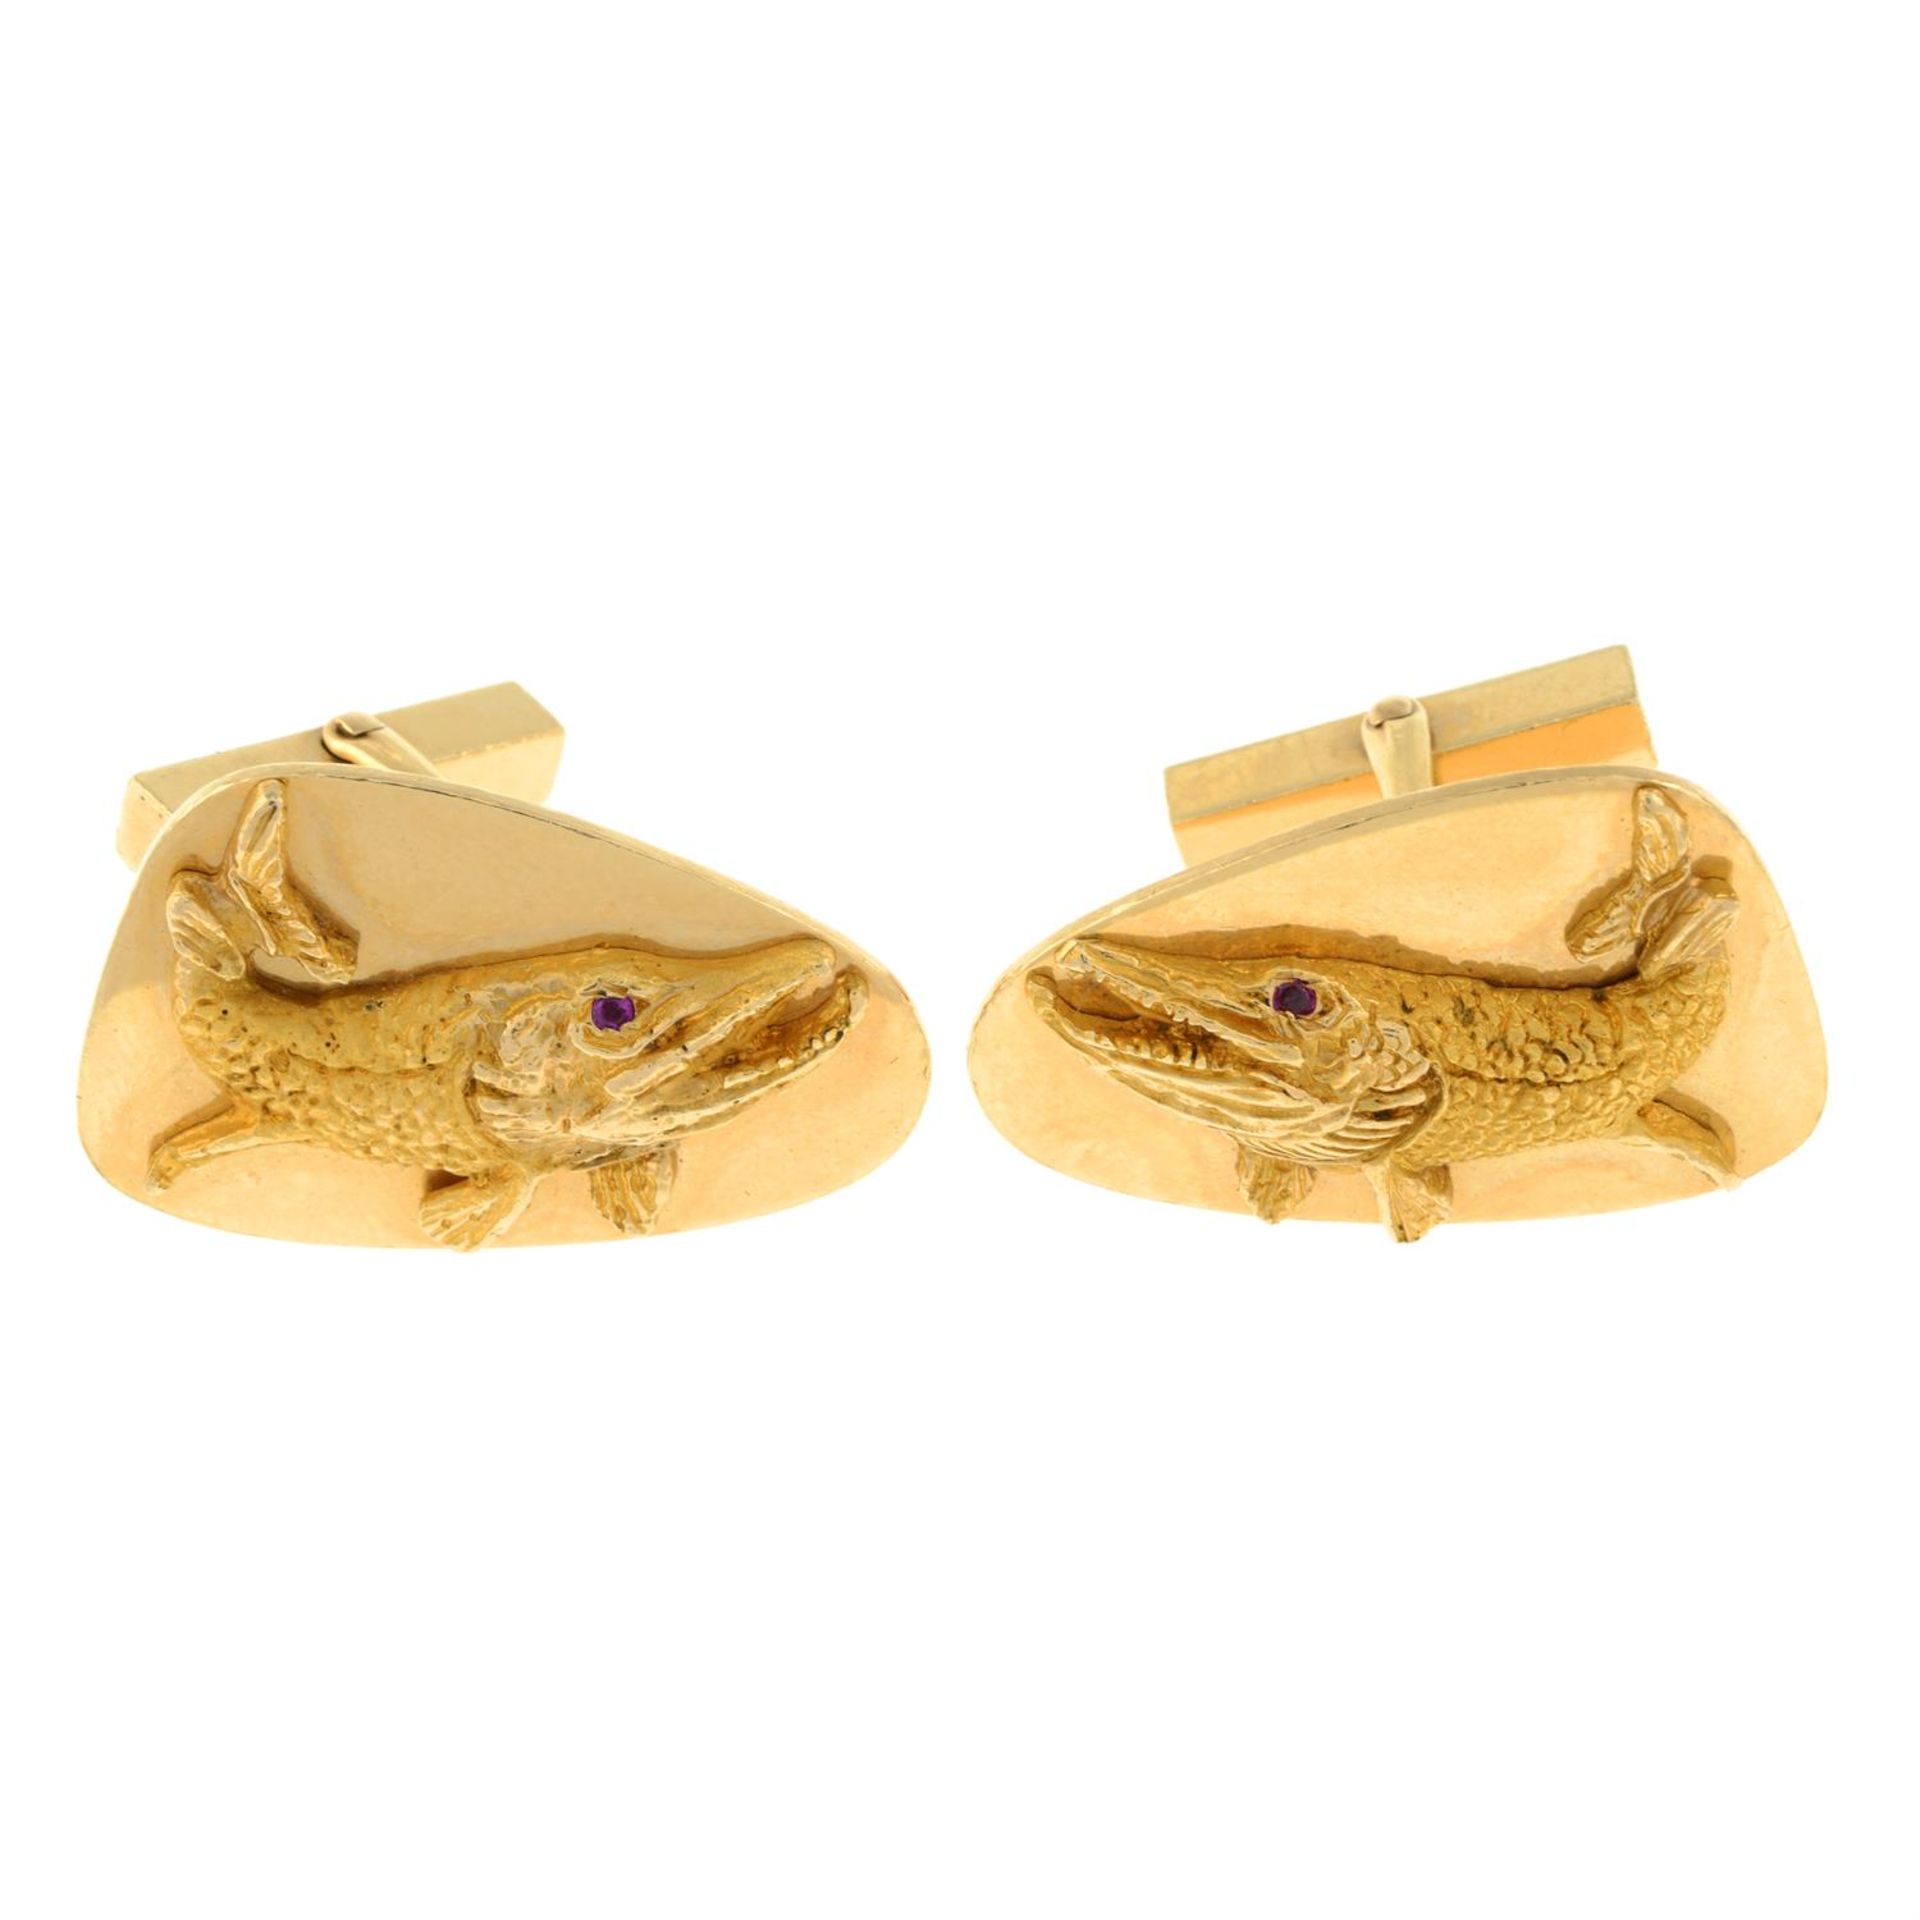 A pair of pike cufflinks, with ruby eyes, by Tiffany & Co. - Image 2 of 4